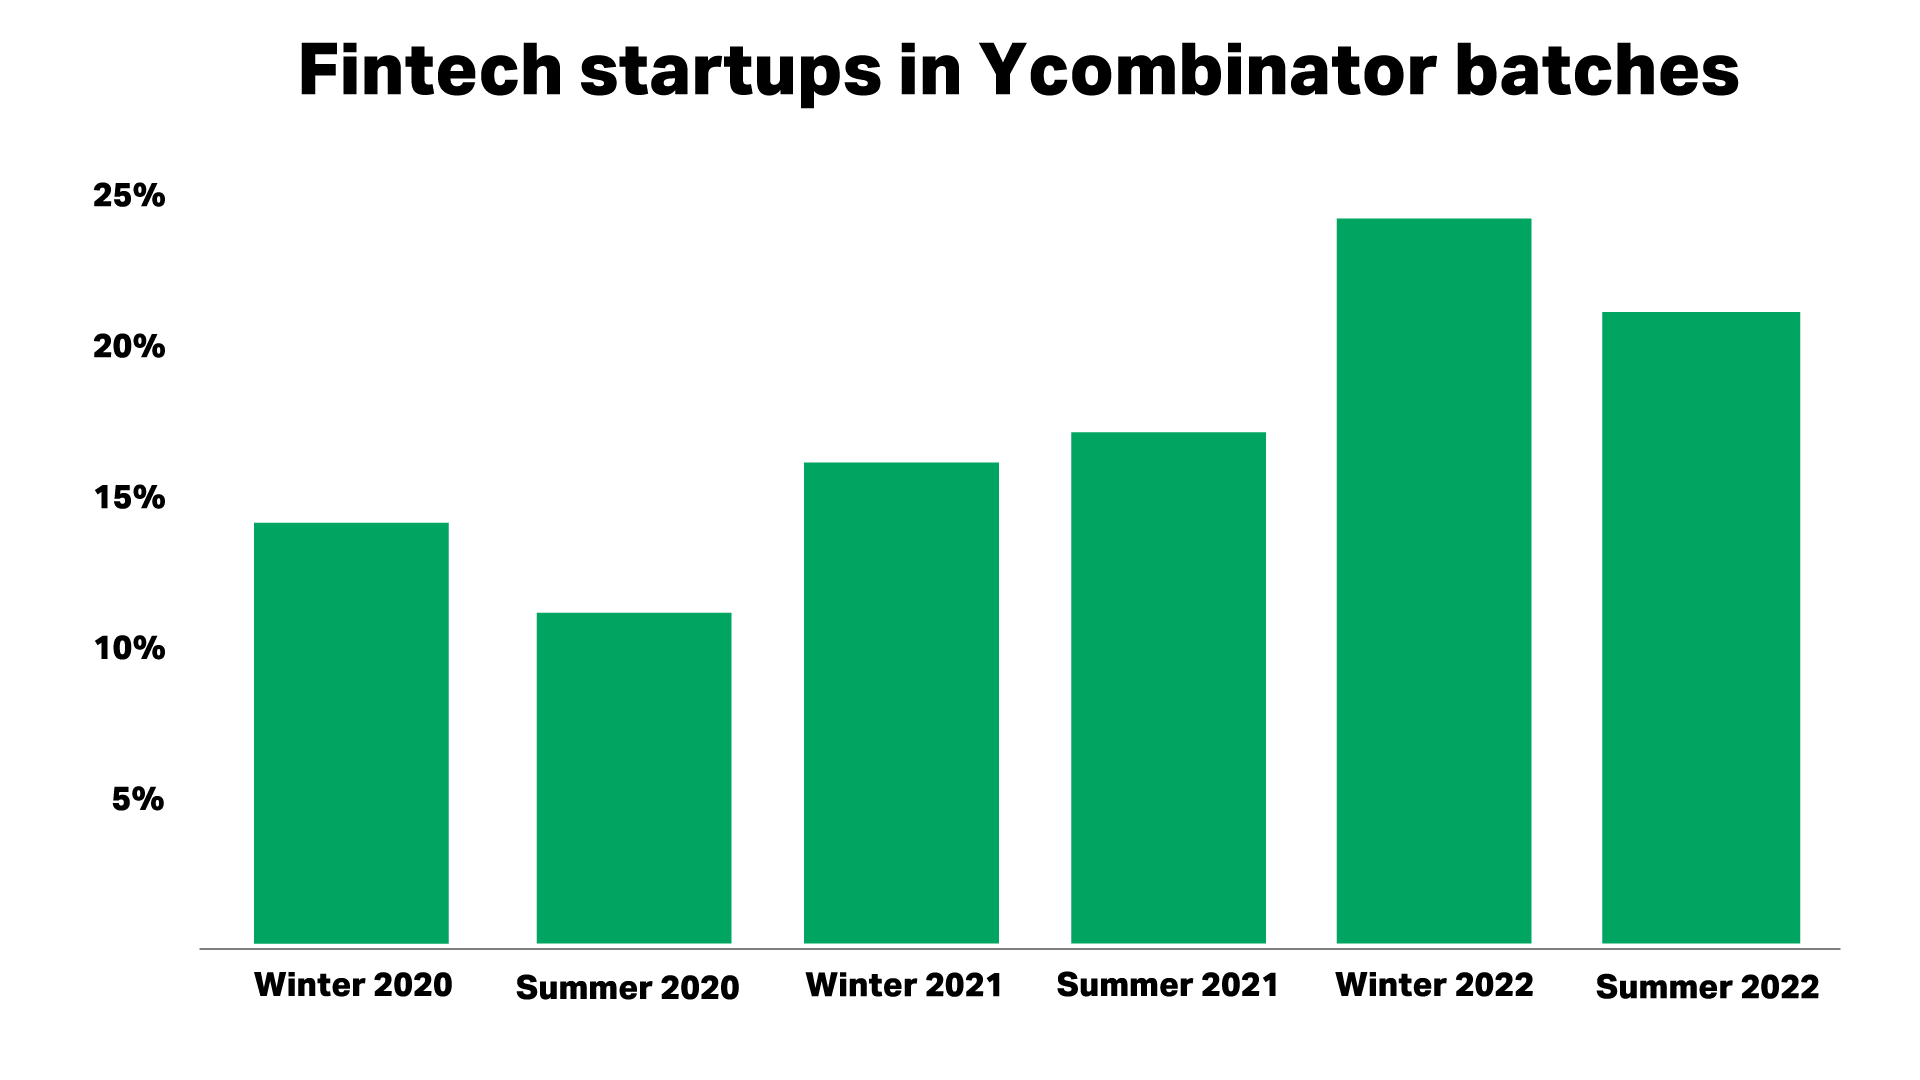 Fintech startups in YC batches since Winter 2020 to Summer 2022